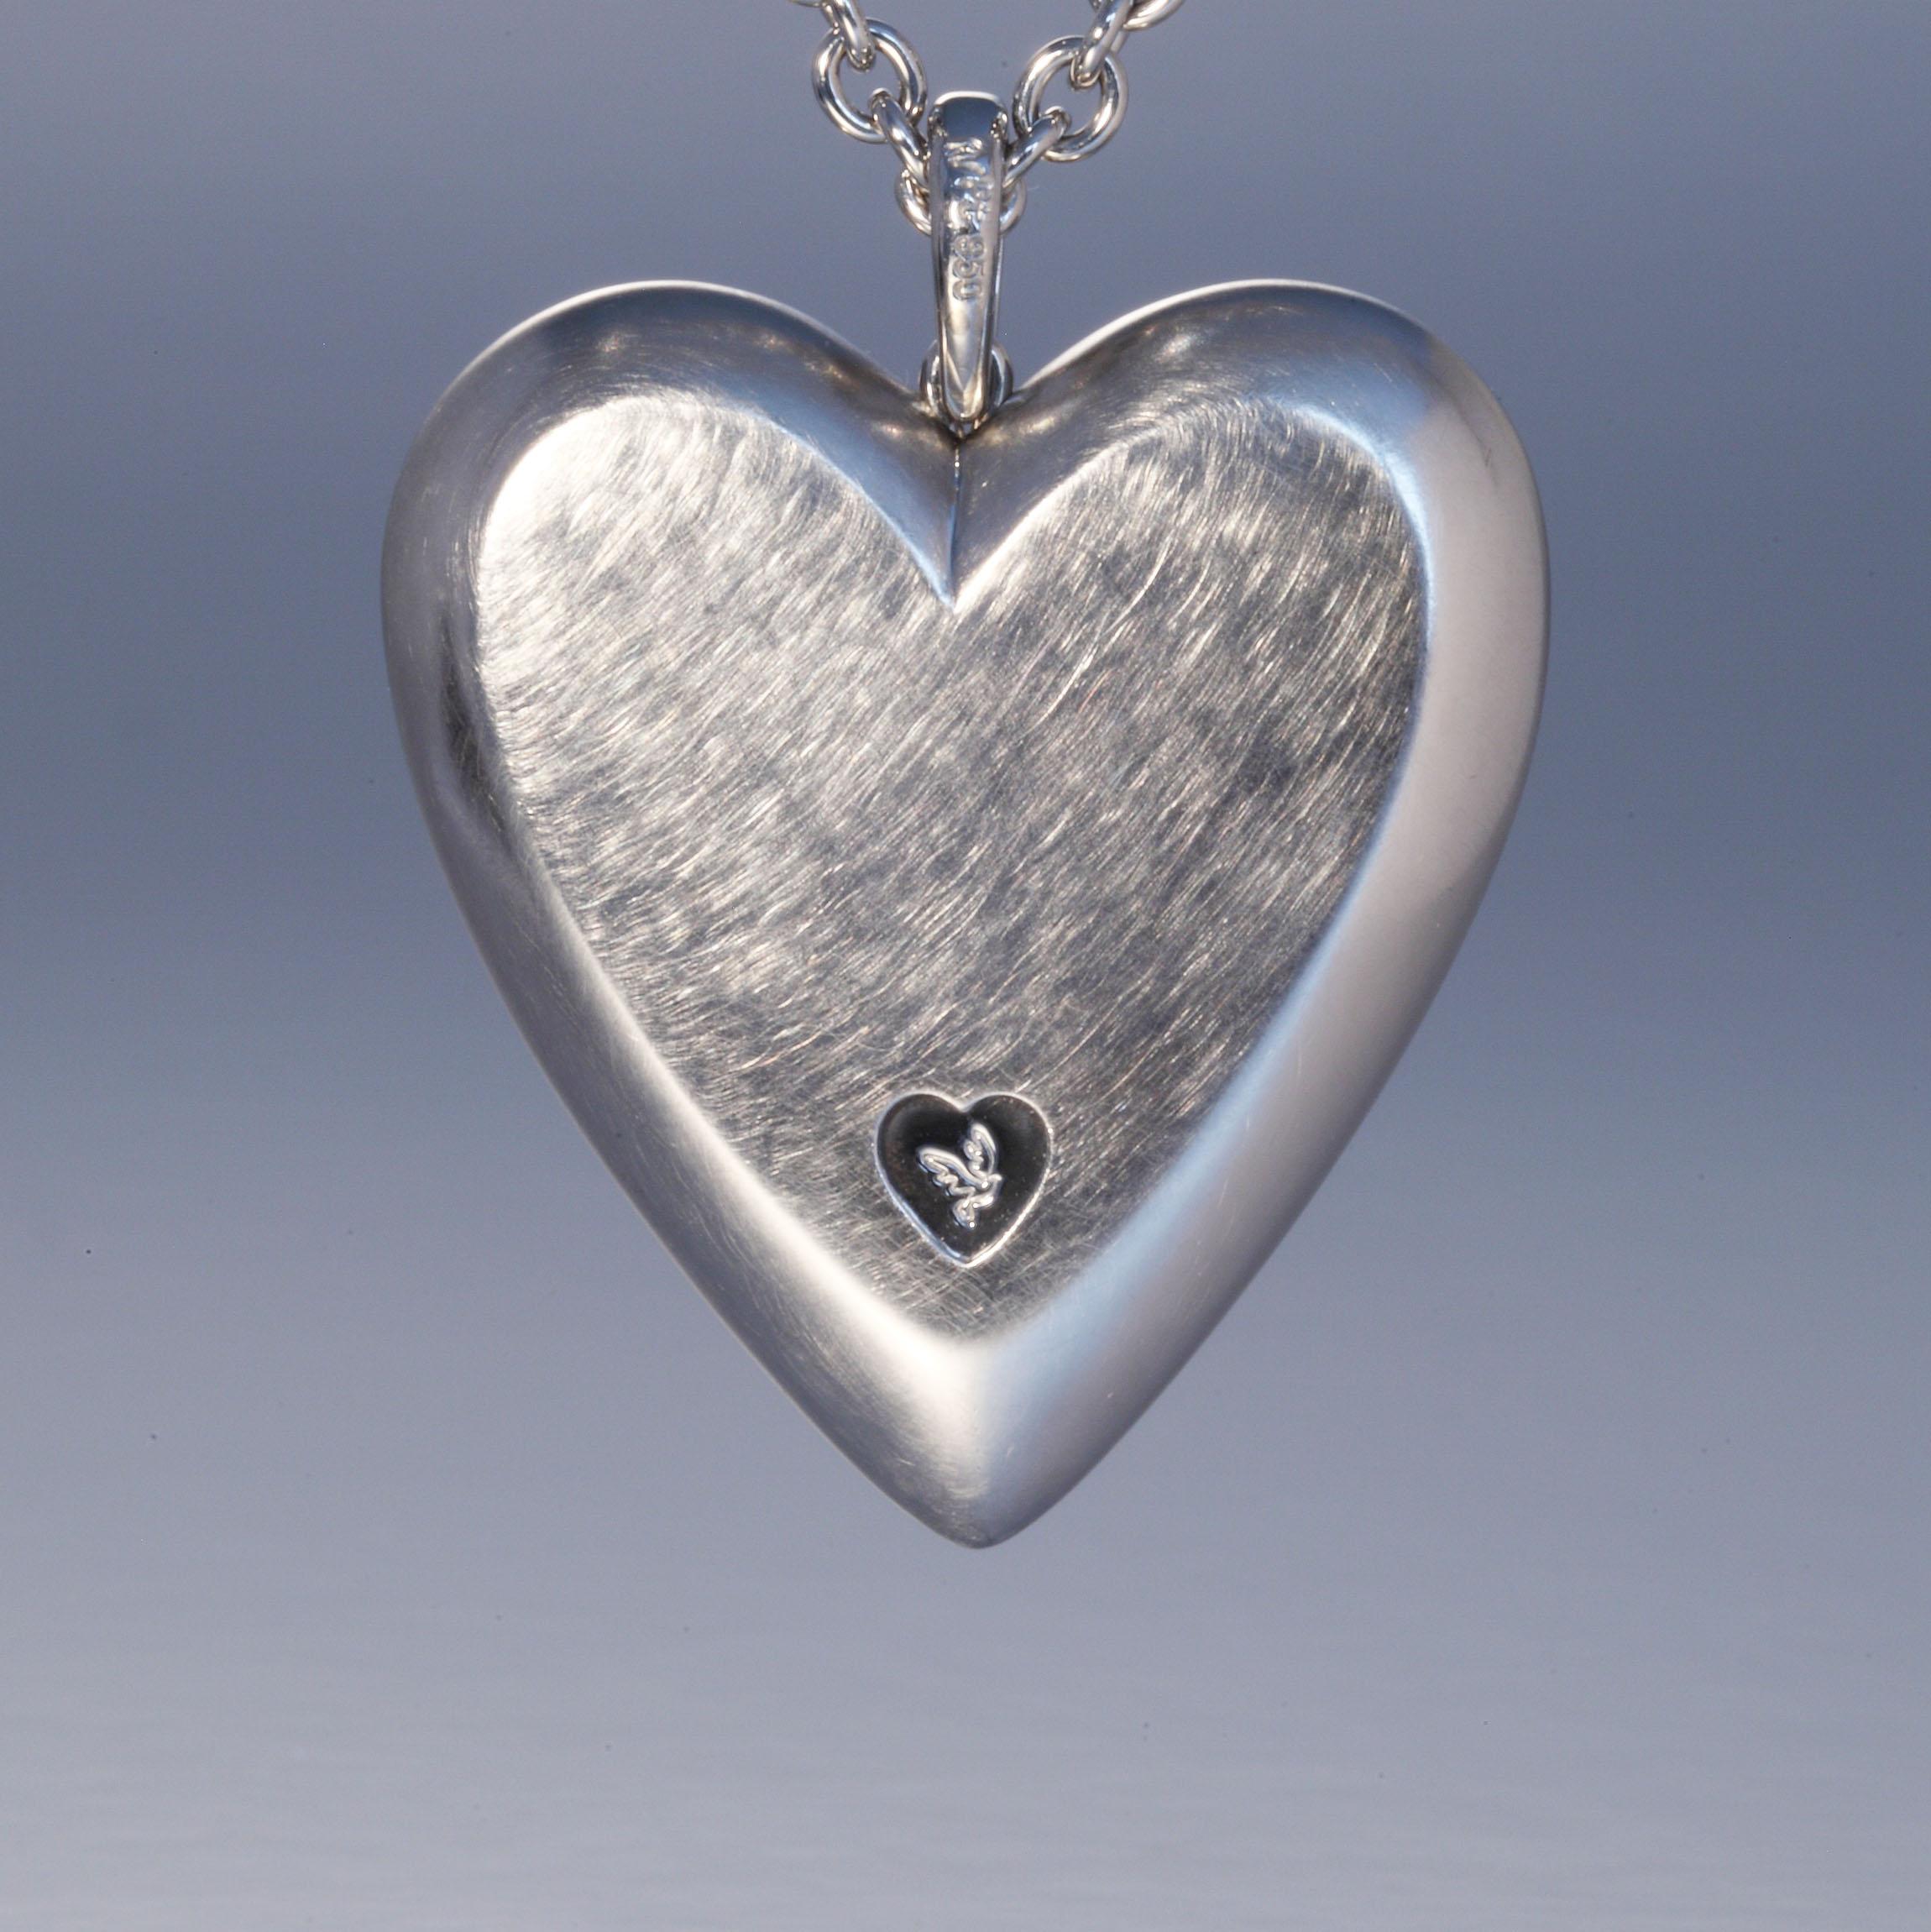 Robert Vogelsang 0.16 Carat Diamond Platinum Heart Pendant Necklace In New Condition For Sale In Zurich, CH